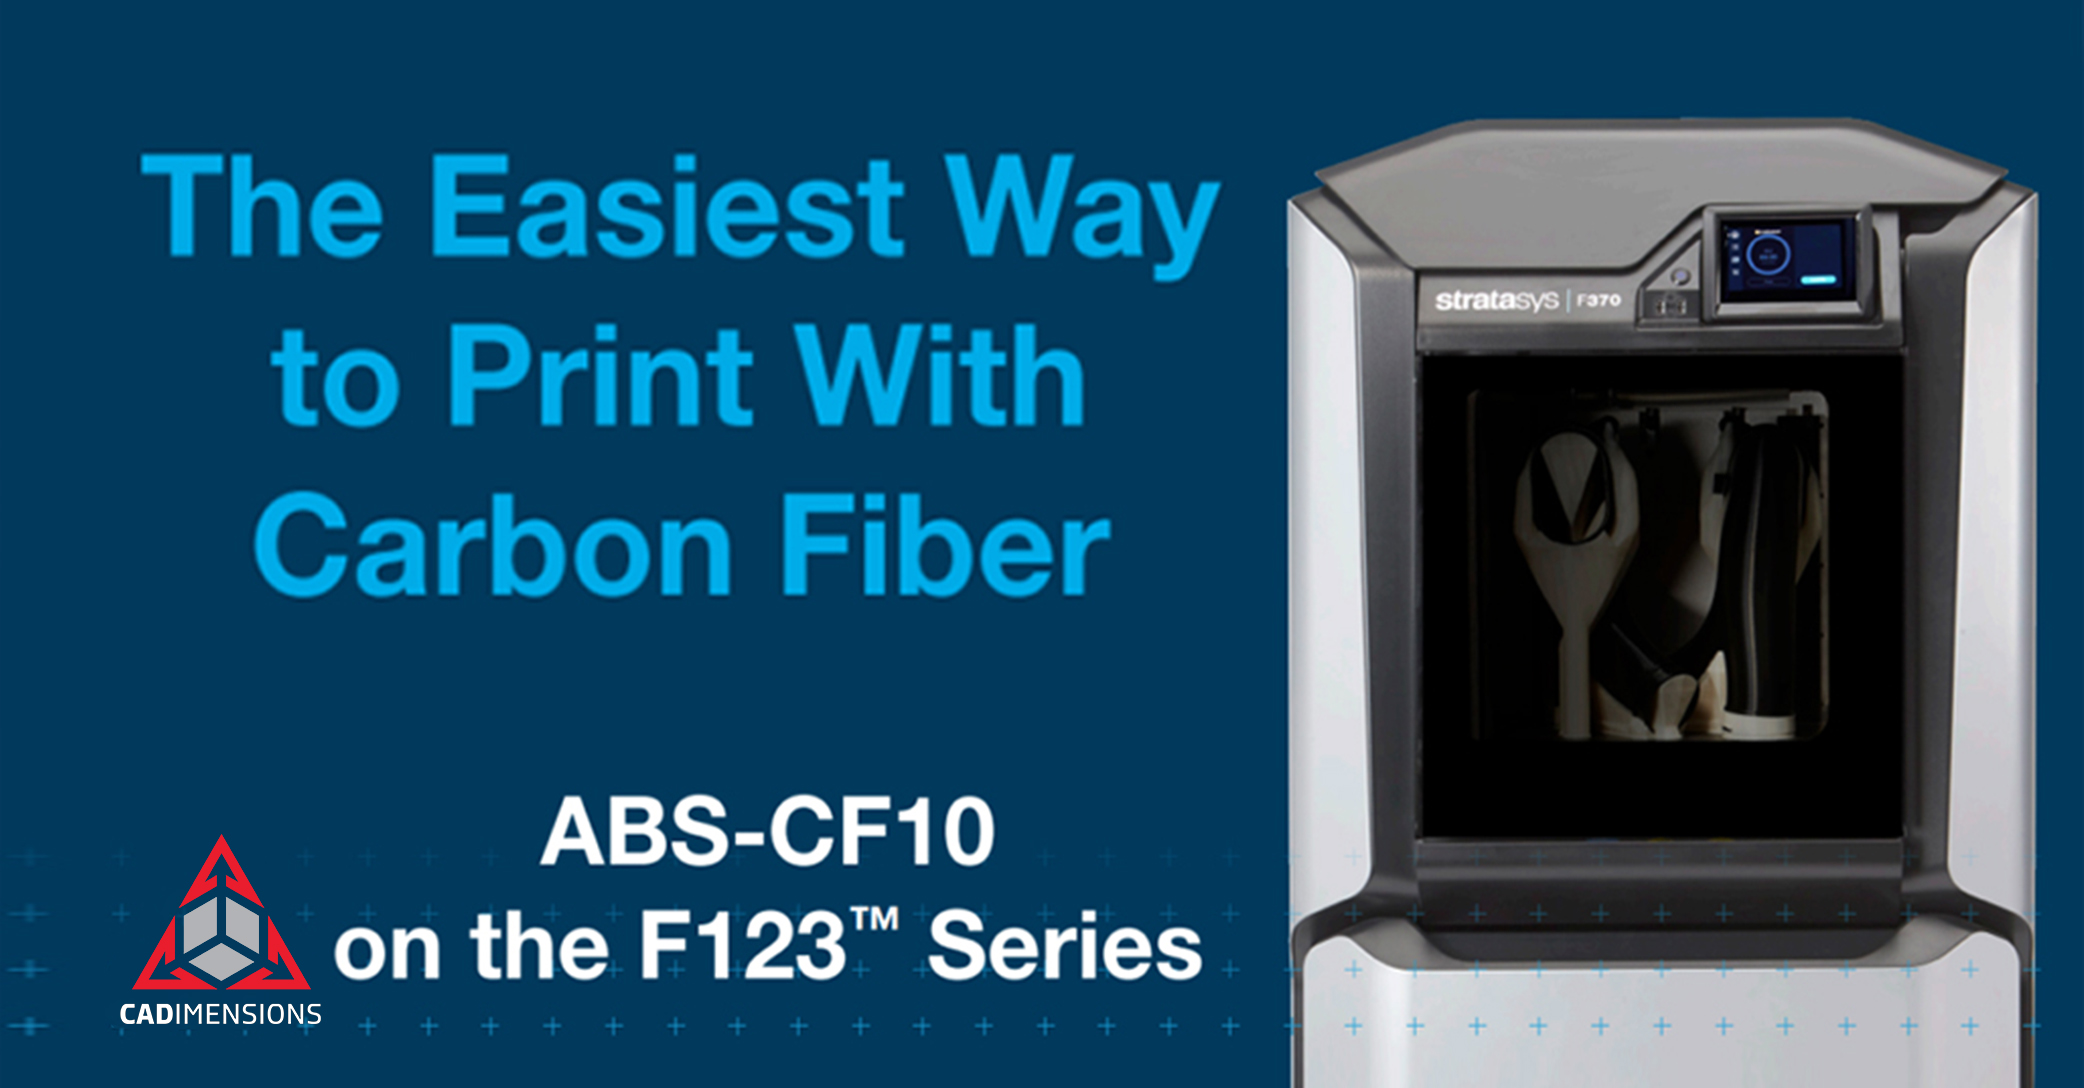 ABS-CF10: Stratasys’s Latest Carbon Fiber Material